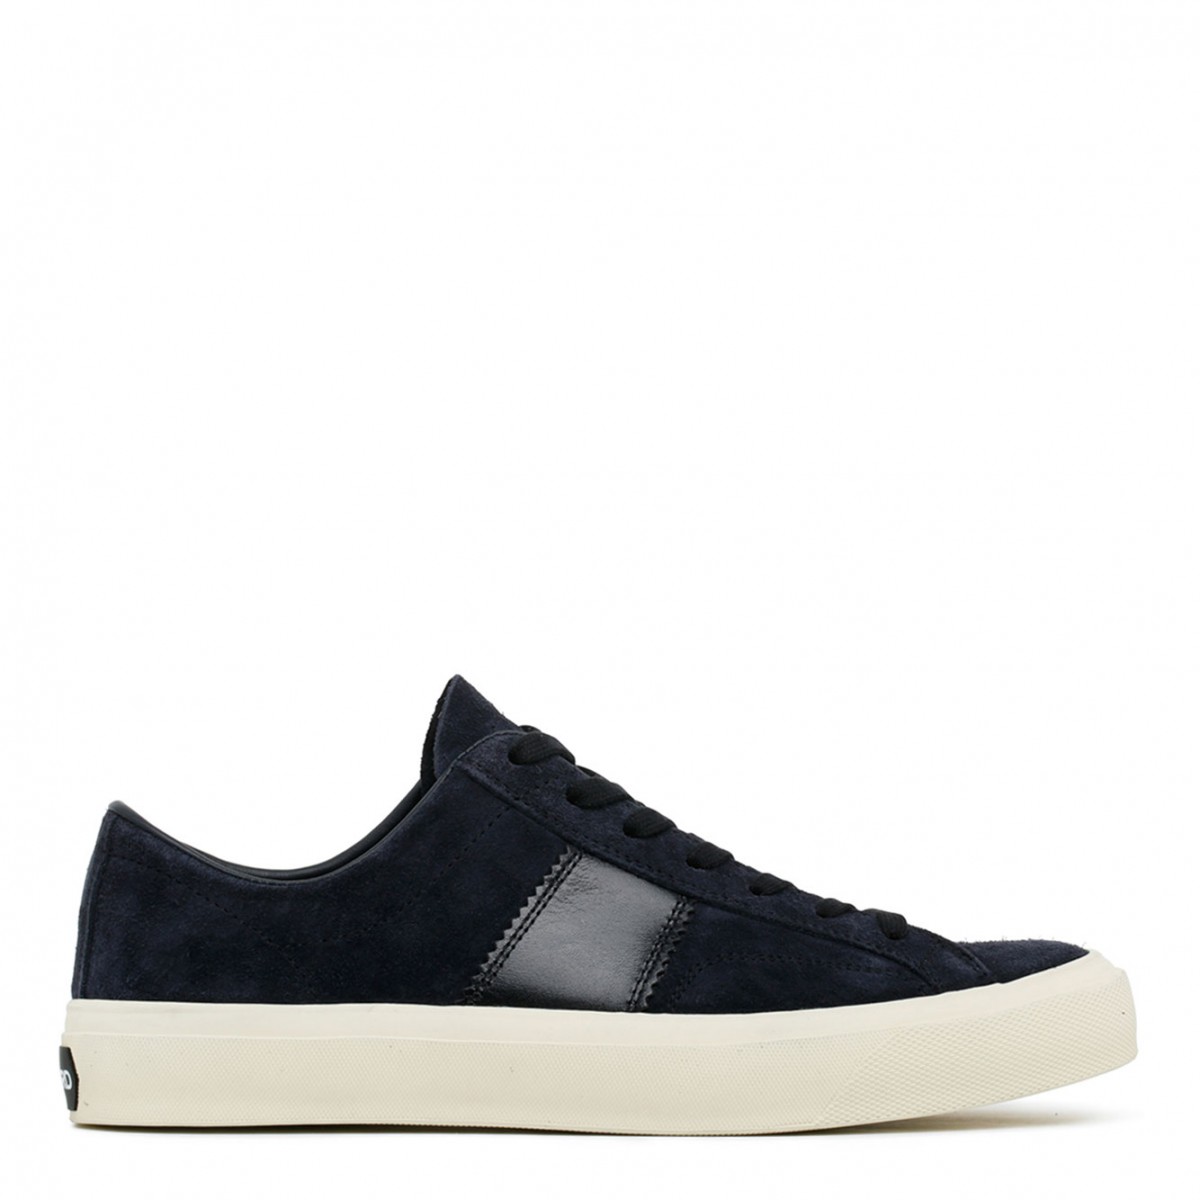 Tom Ford Navy Blue and Cream Calf Suede and Calf Leather Logo Patch Sneakers.